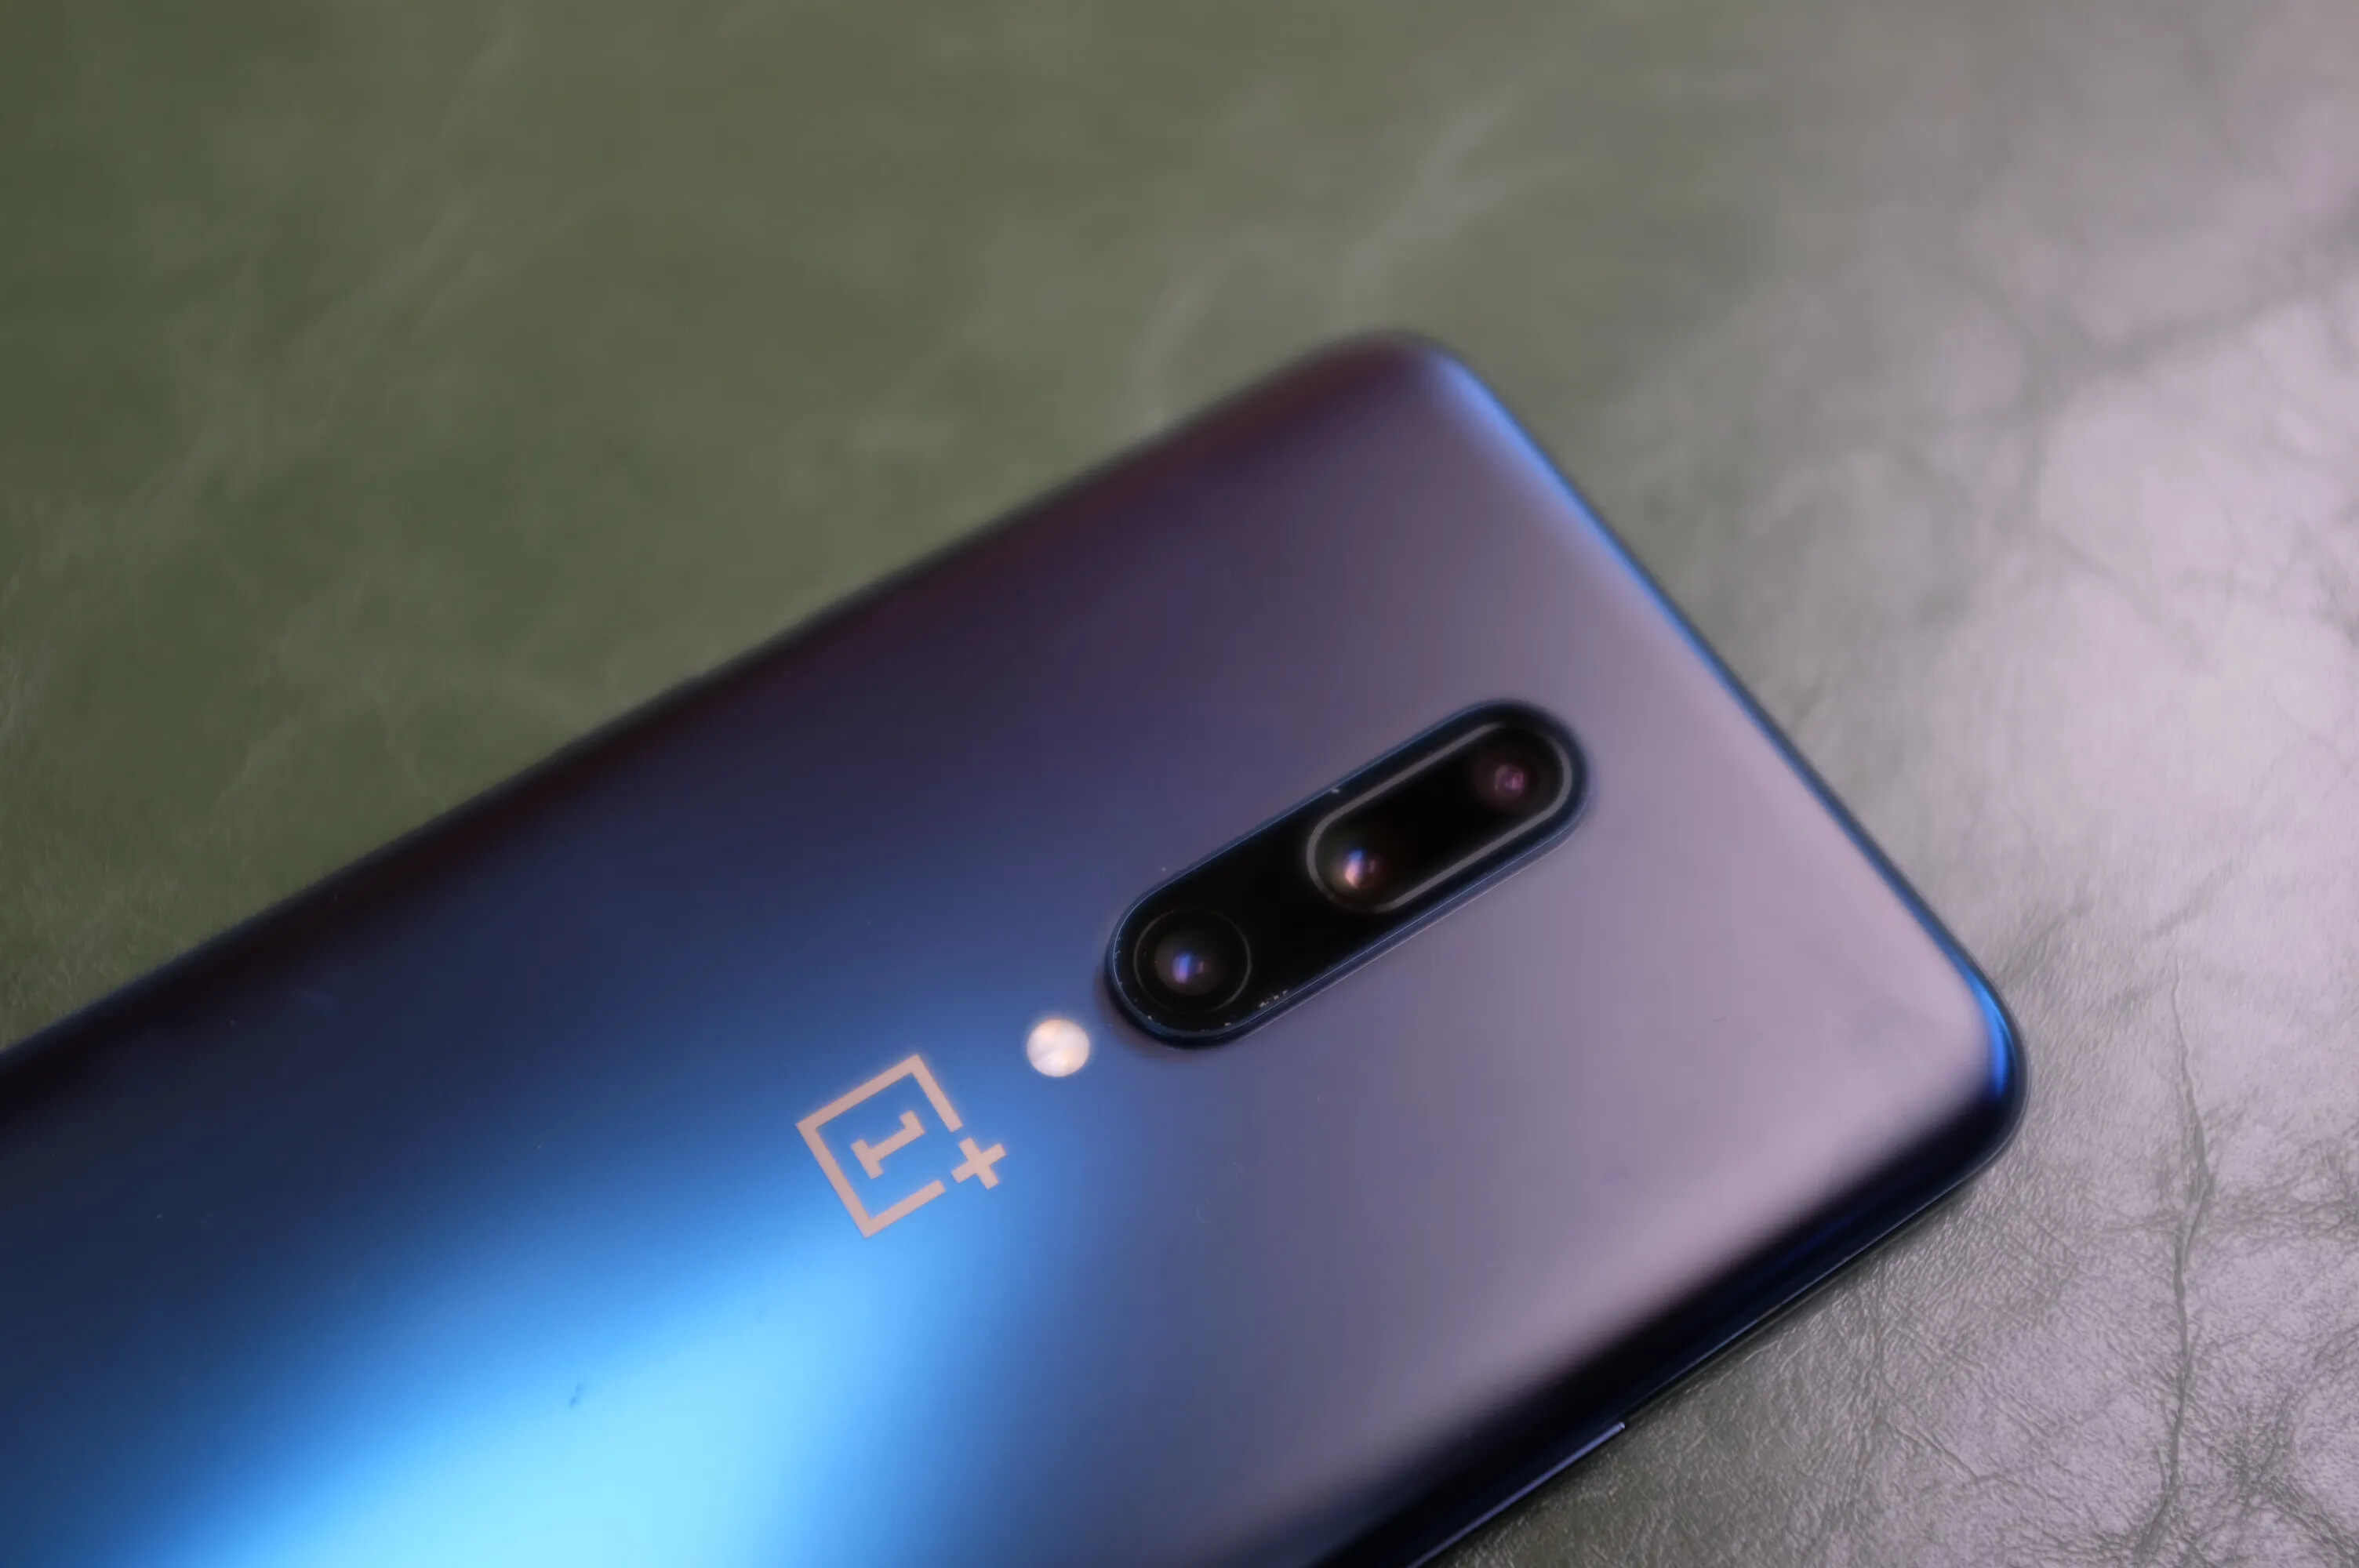 sprint-and-oneplus-to-introduce-a-5g-phone-in-the-u-s-soon